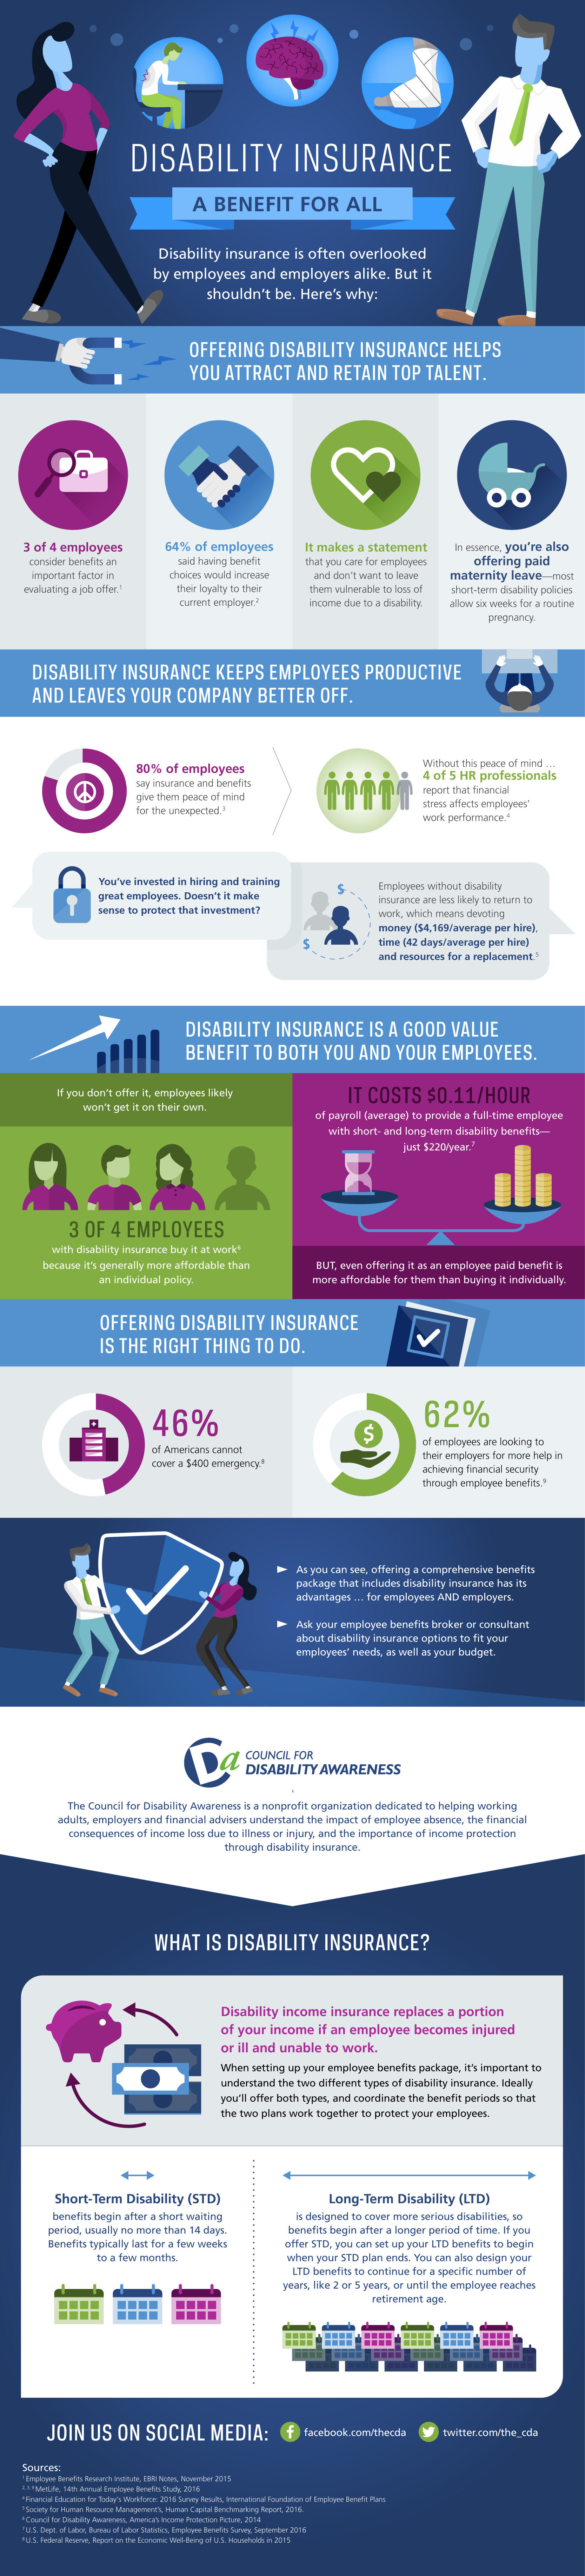 disability insurance: a benefit for all